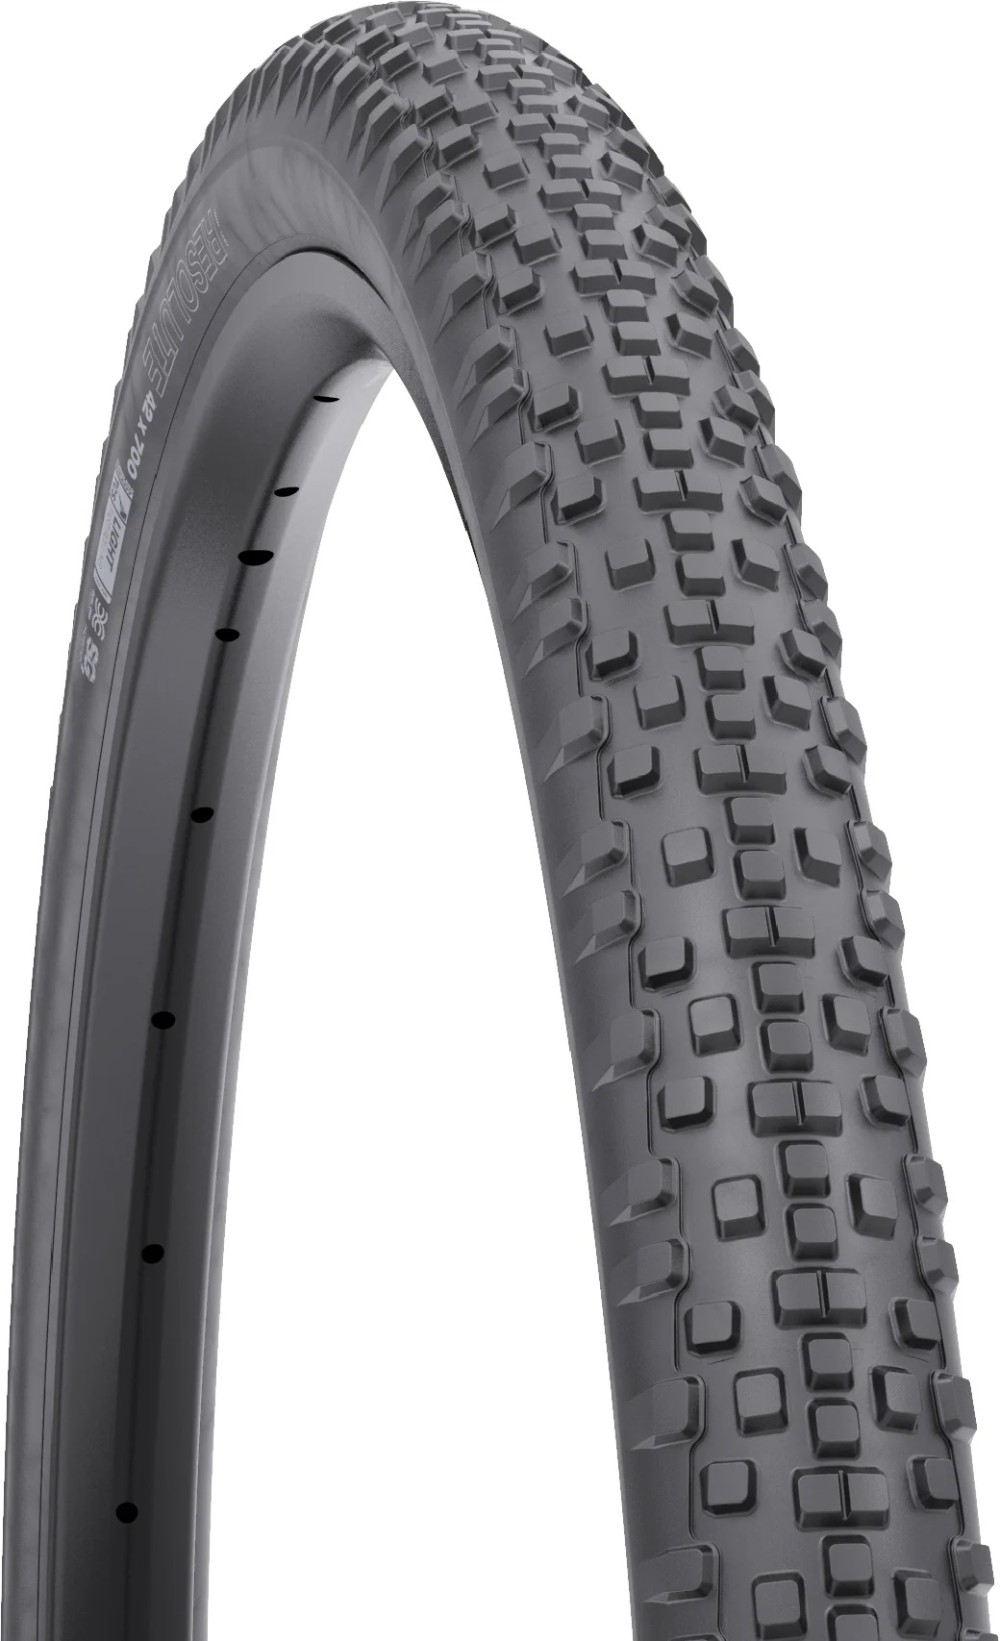 Resolute TCS Light/Fast Rolling 120tpi Dual DNA SG2 700c Tyre image 0